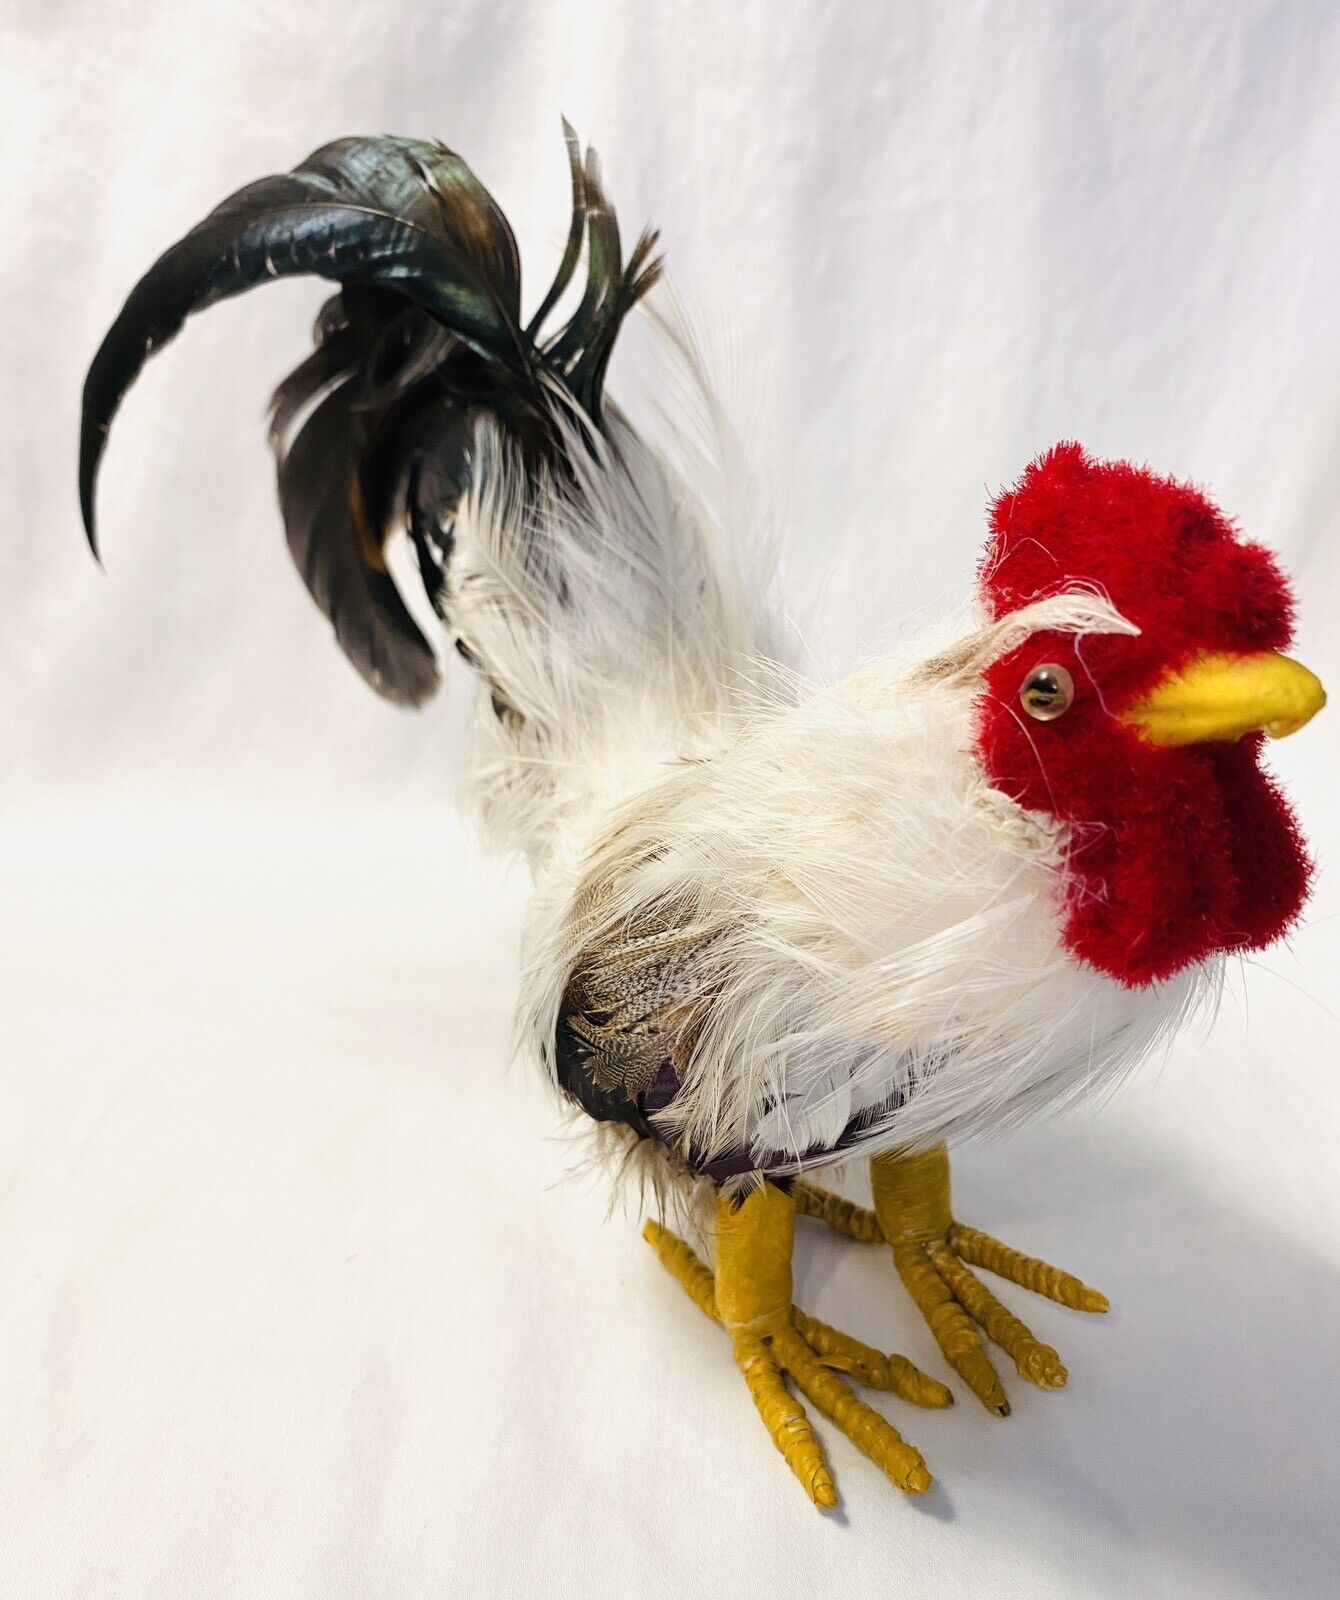 Feathered Rooster Chicken Handmade Figurine Realistic Farmhouse Decor 7”x9”